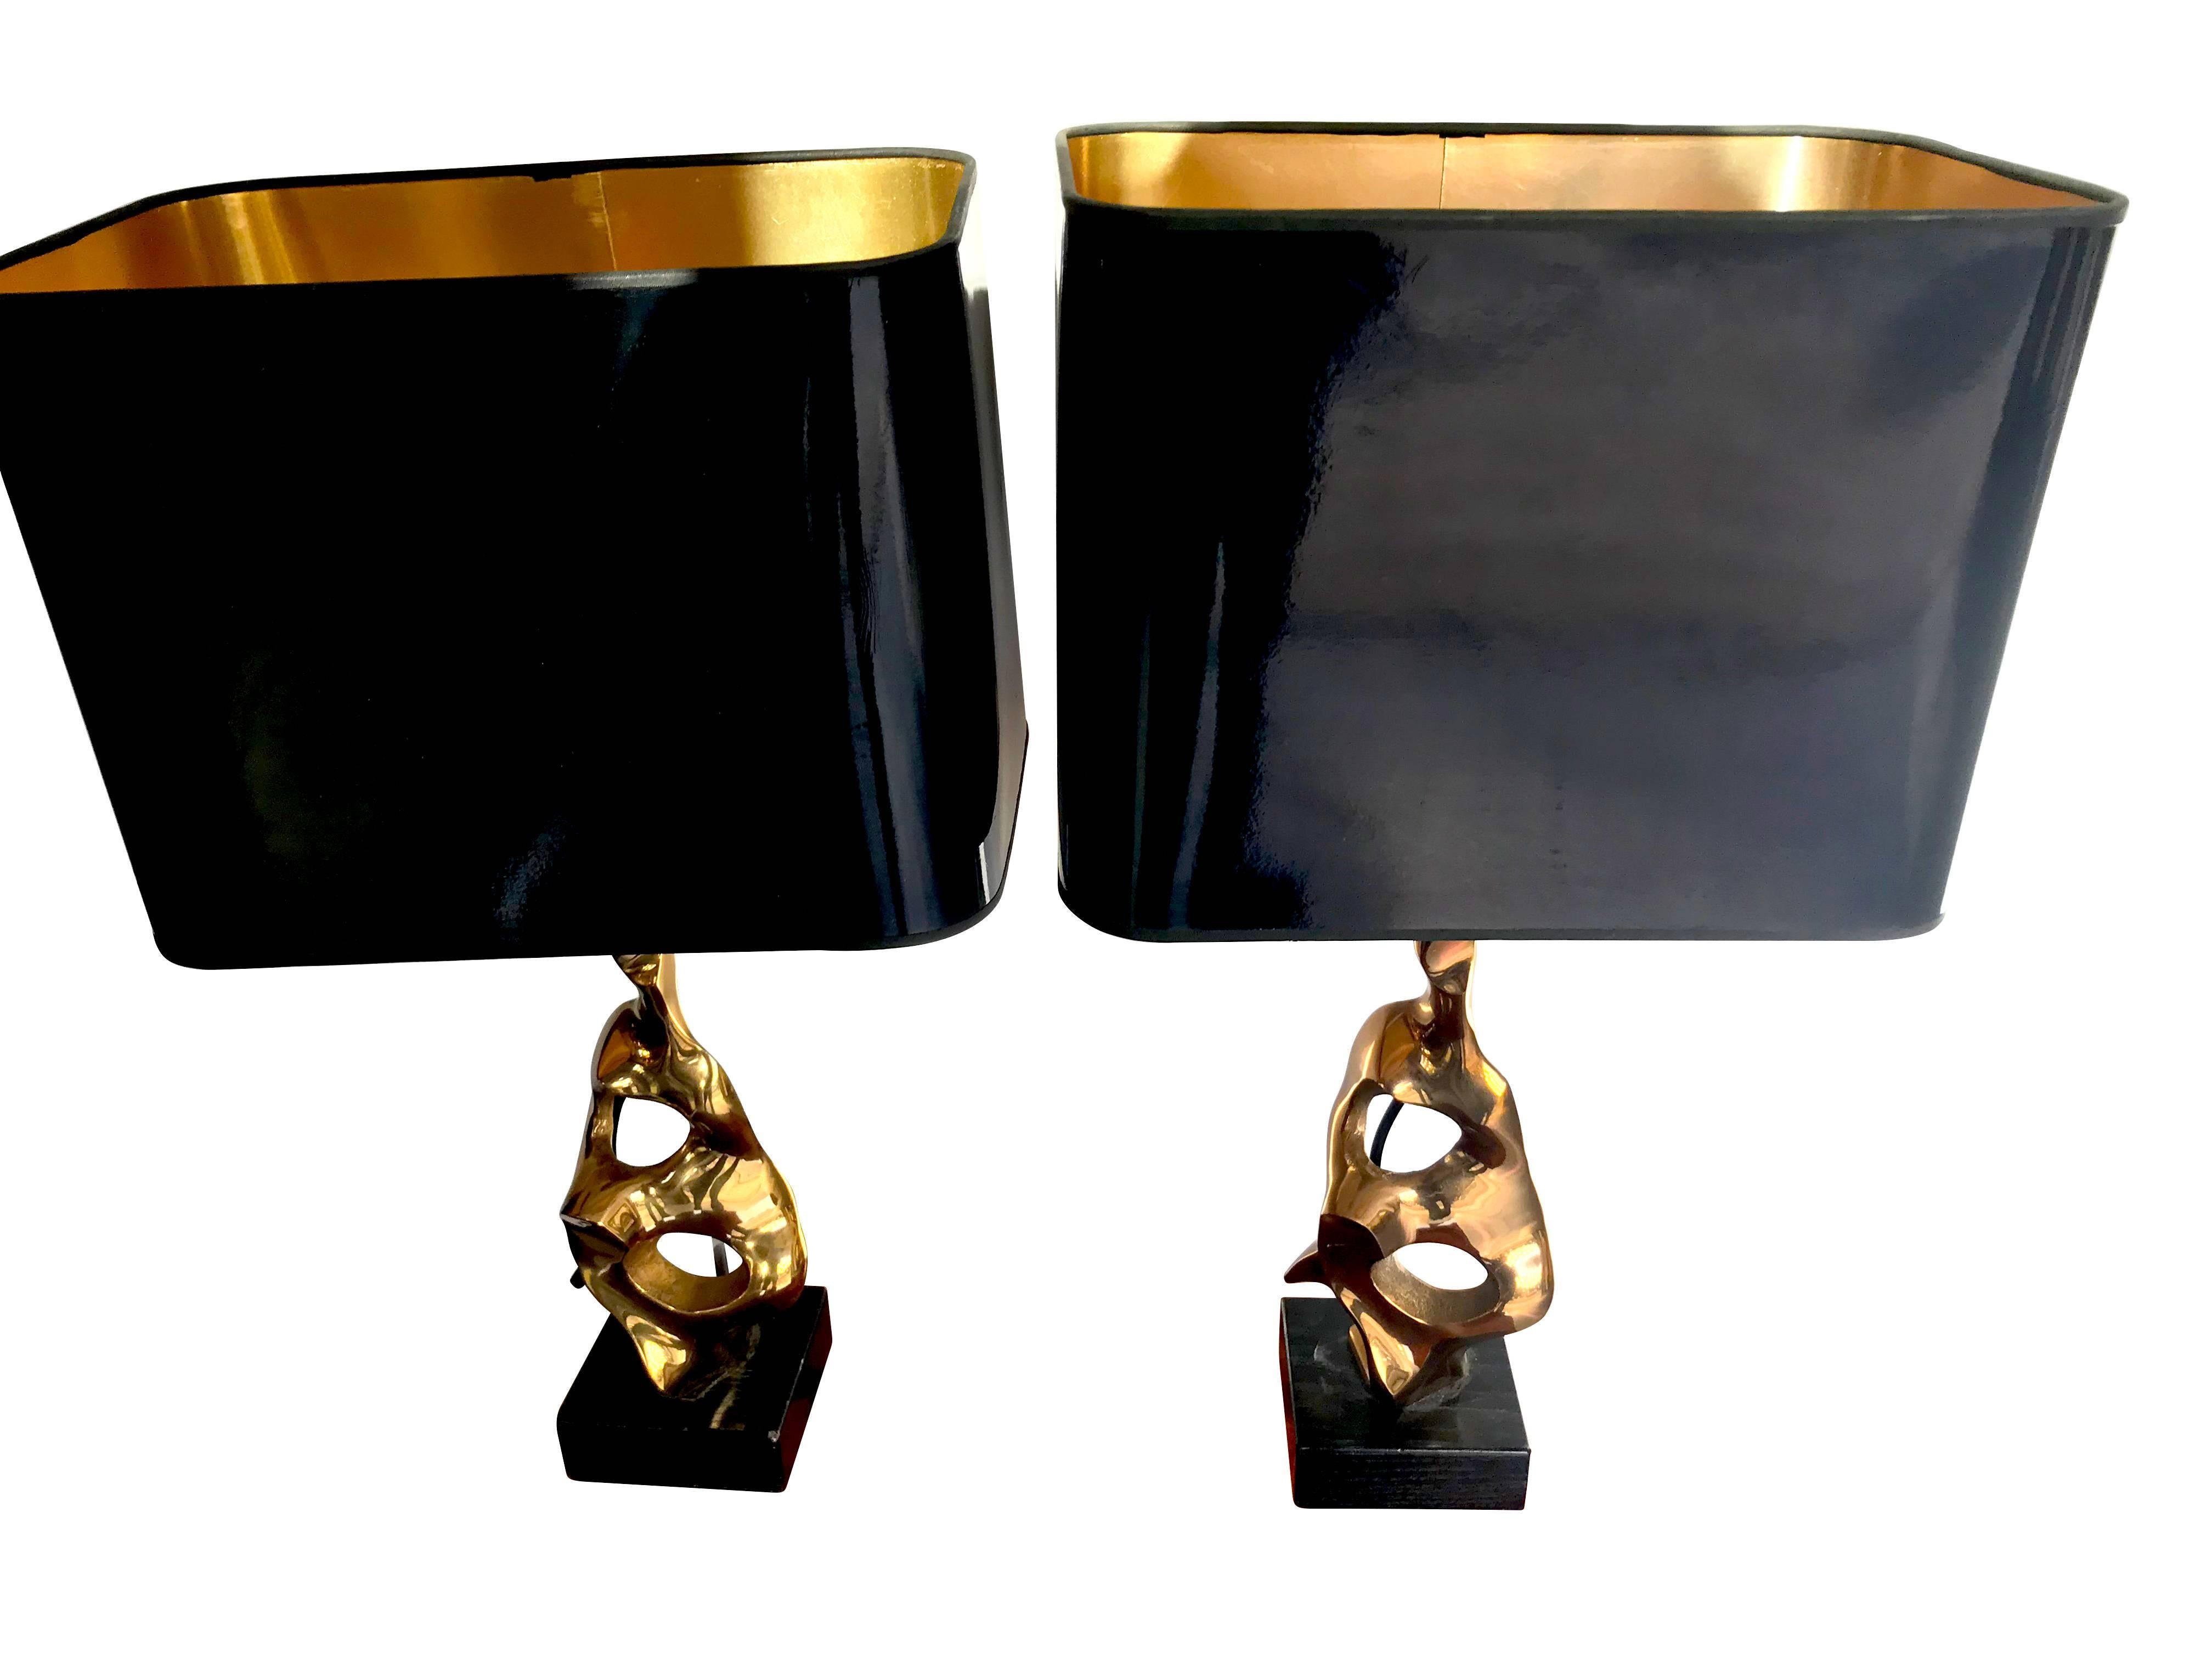 A pair of bronze, abstract, sculptural lamps by Michel Jaubert, signed on the base of each sculpture 